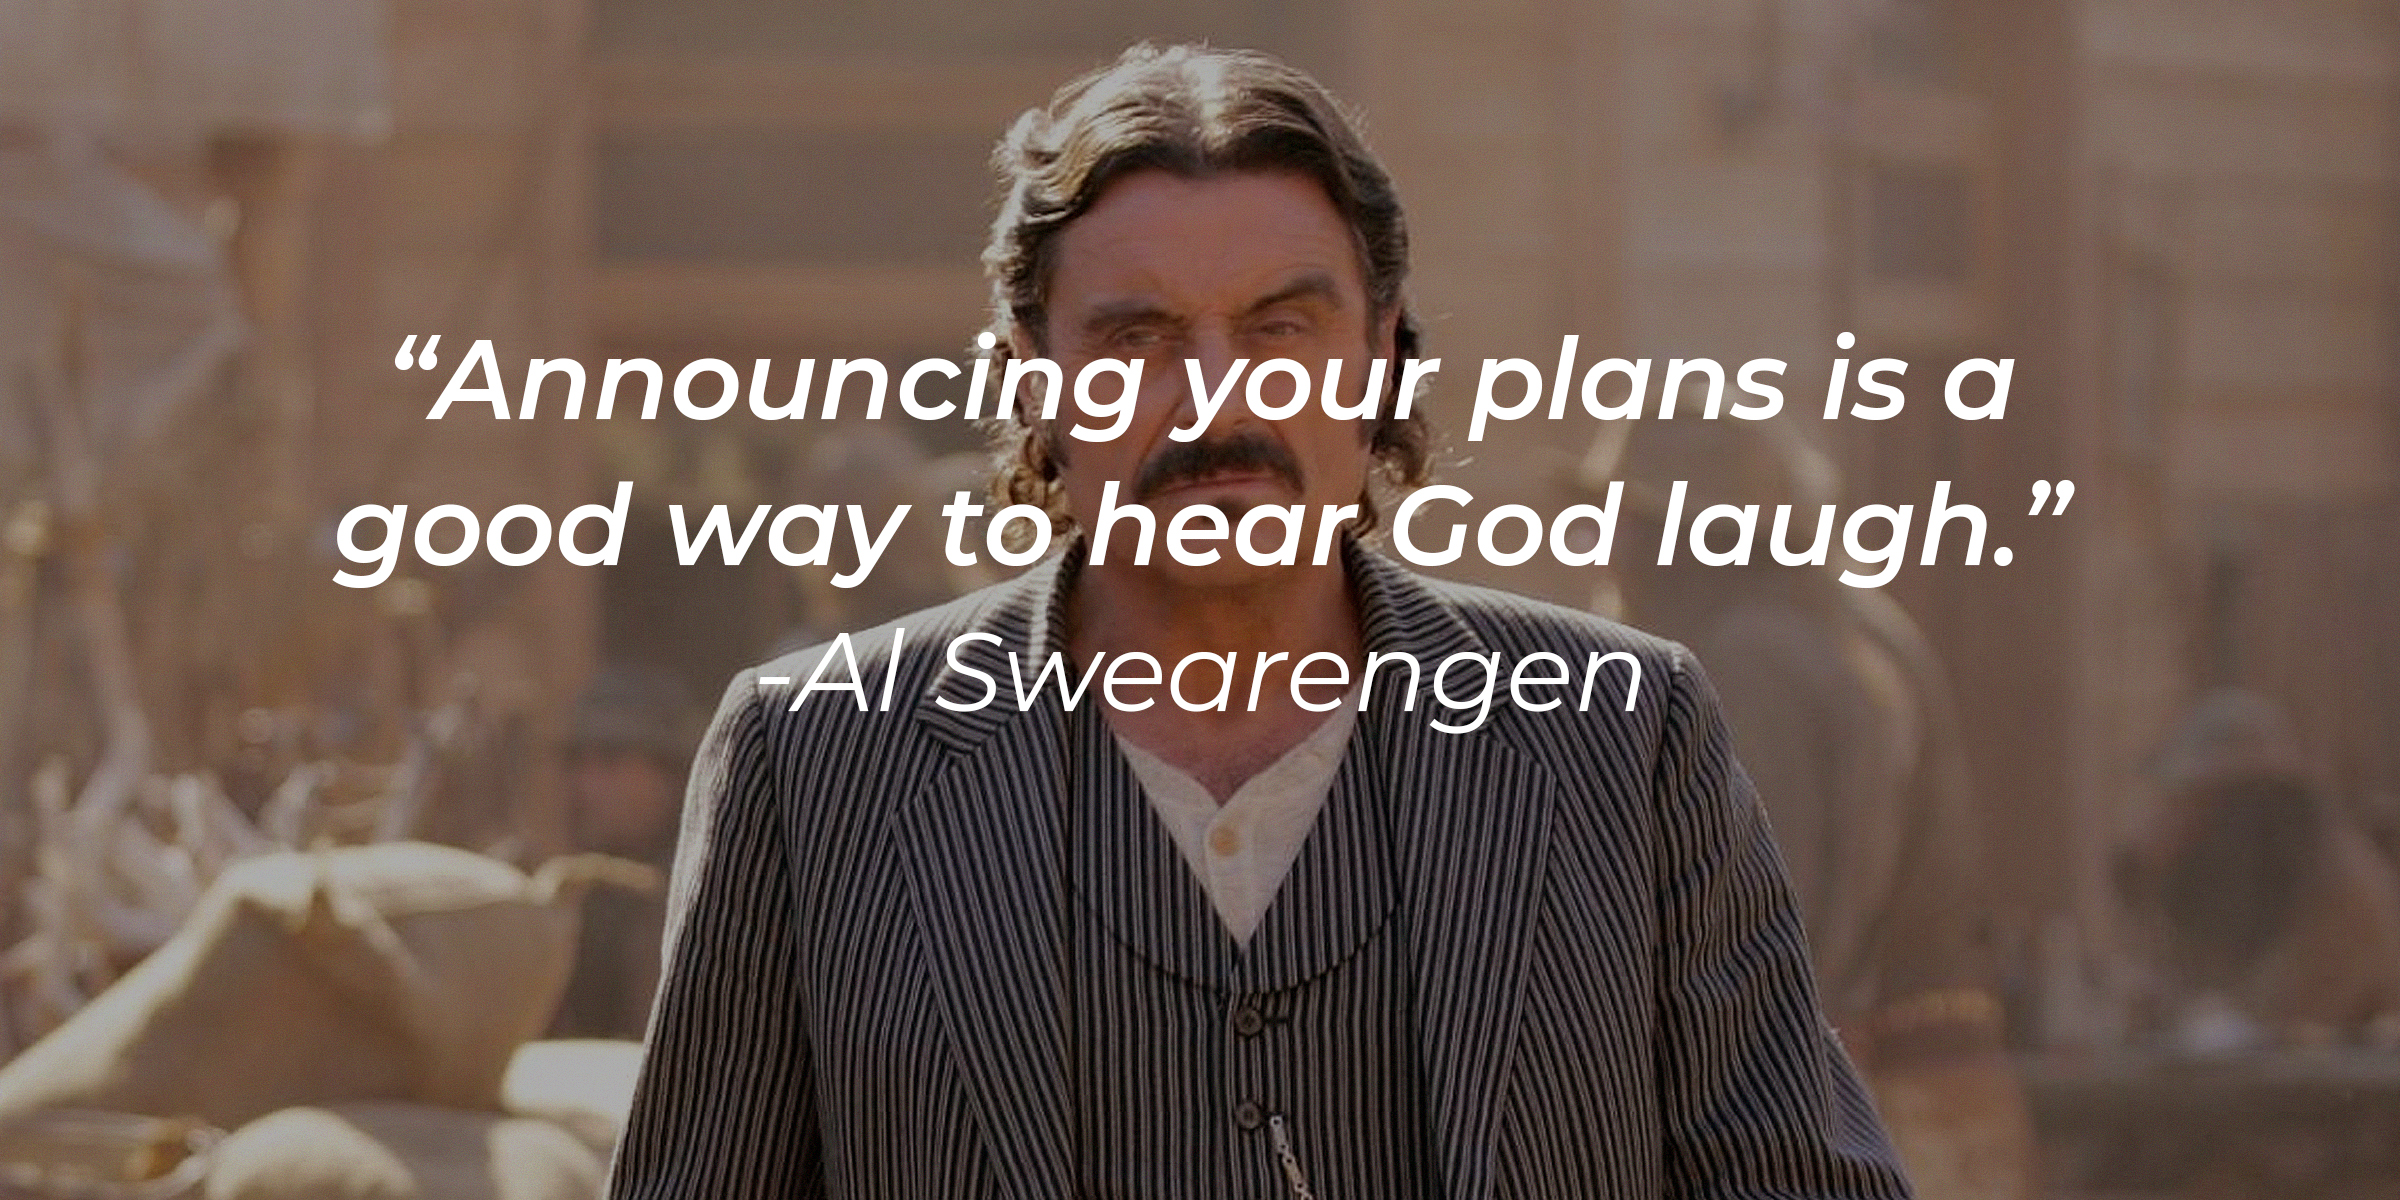 Al Swearengen with His Quote, “Announcing Your Plans Is a Good Way to Hear God Laugh.” | Source: Facebook/Deadwood